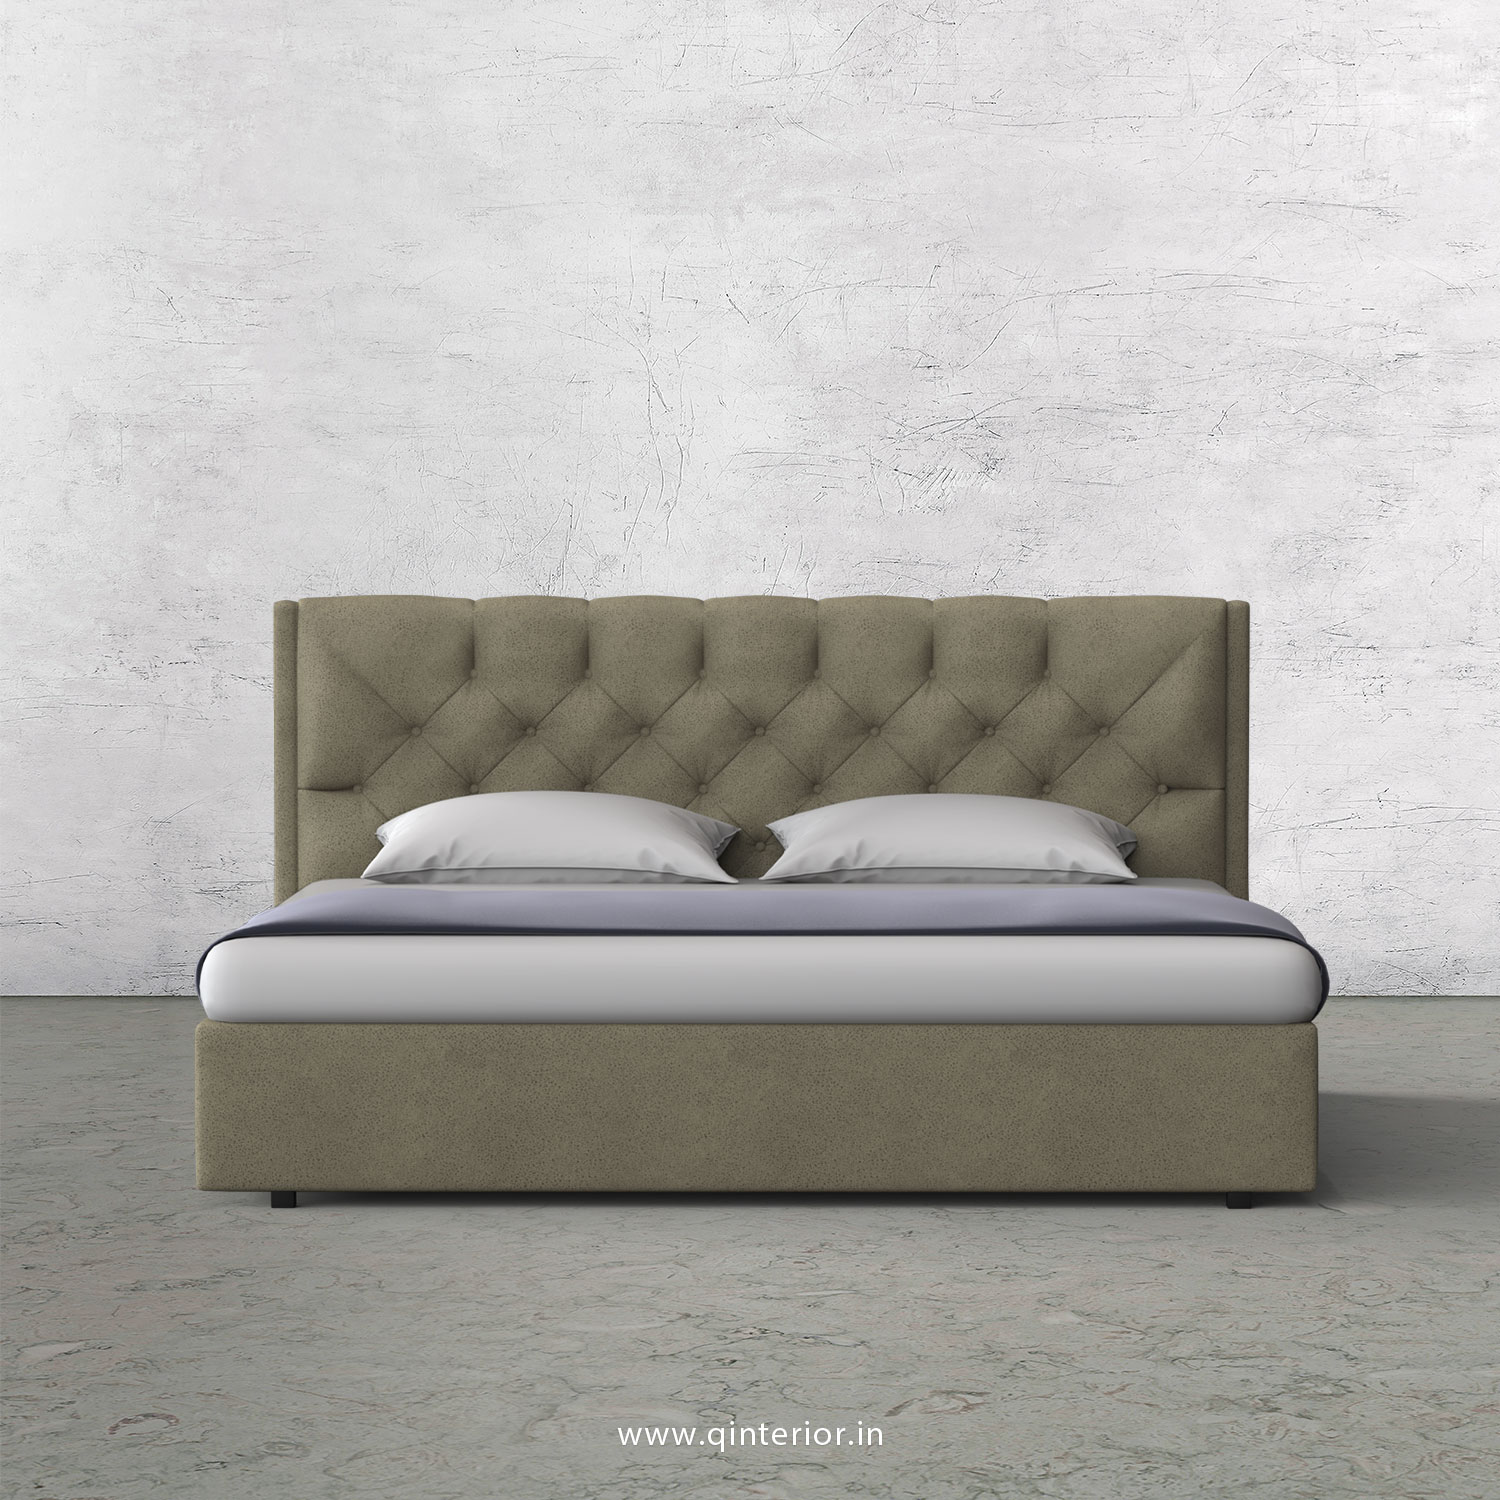 Scorpius King Size Bed in Fab Leather Fabric - KBD009 FL10